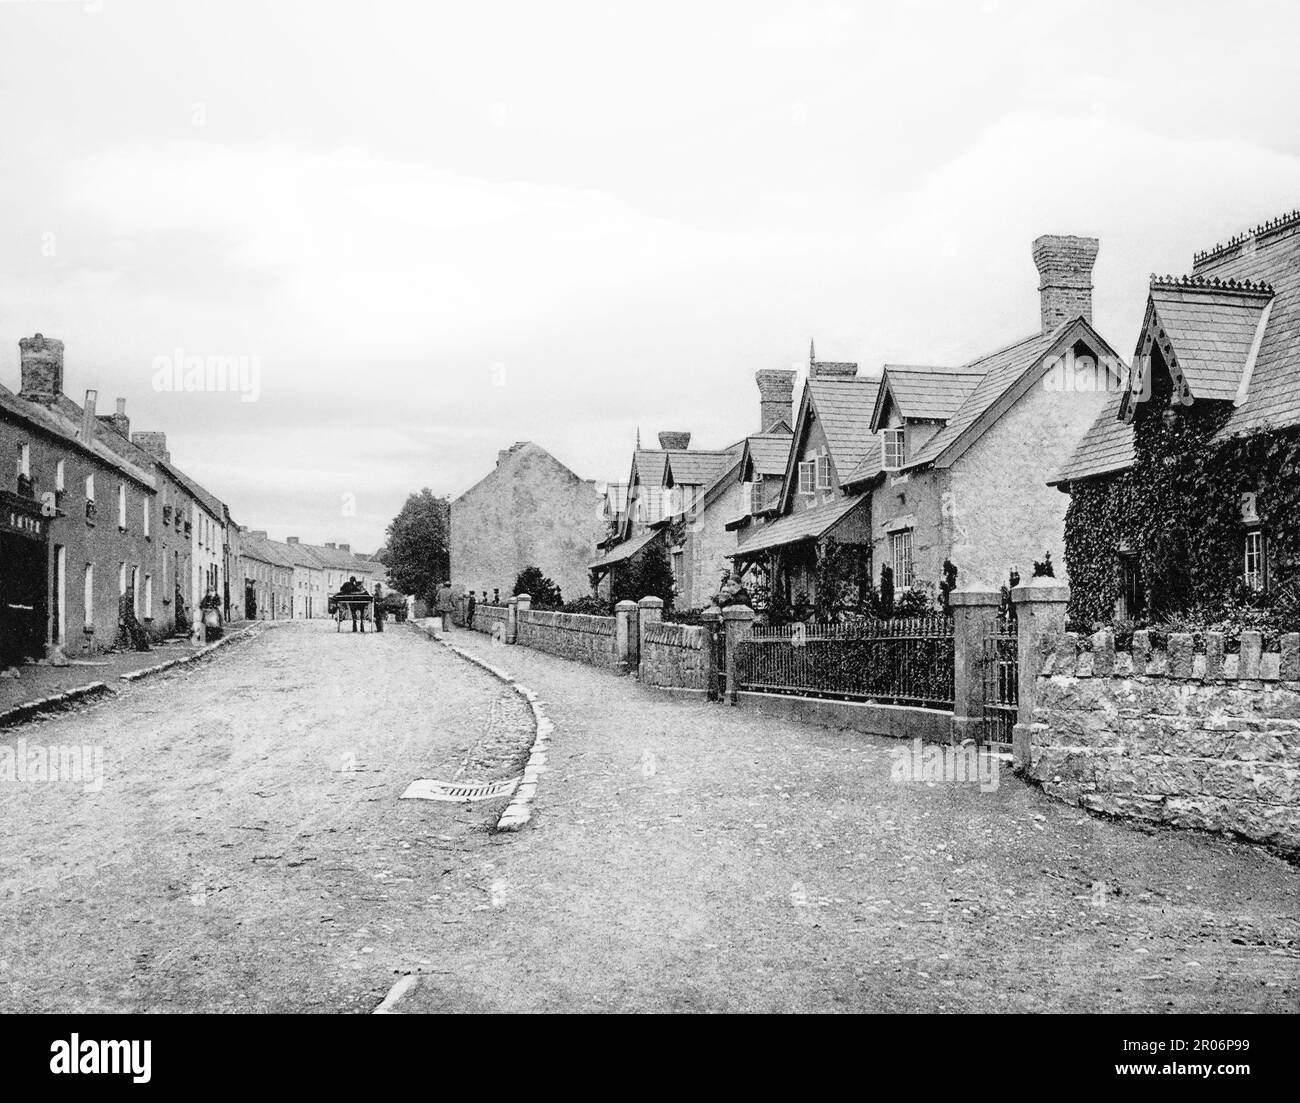 A late 19th century street scene with horse and cart beyond the Alms Houses in Gowran, a town located on the eastern side of County Kilkenny, Ireland Stock Photo